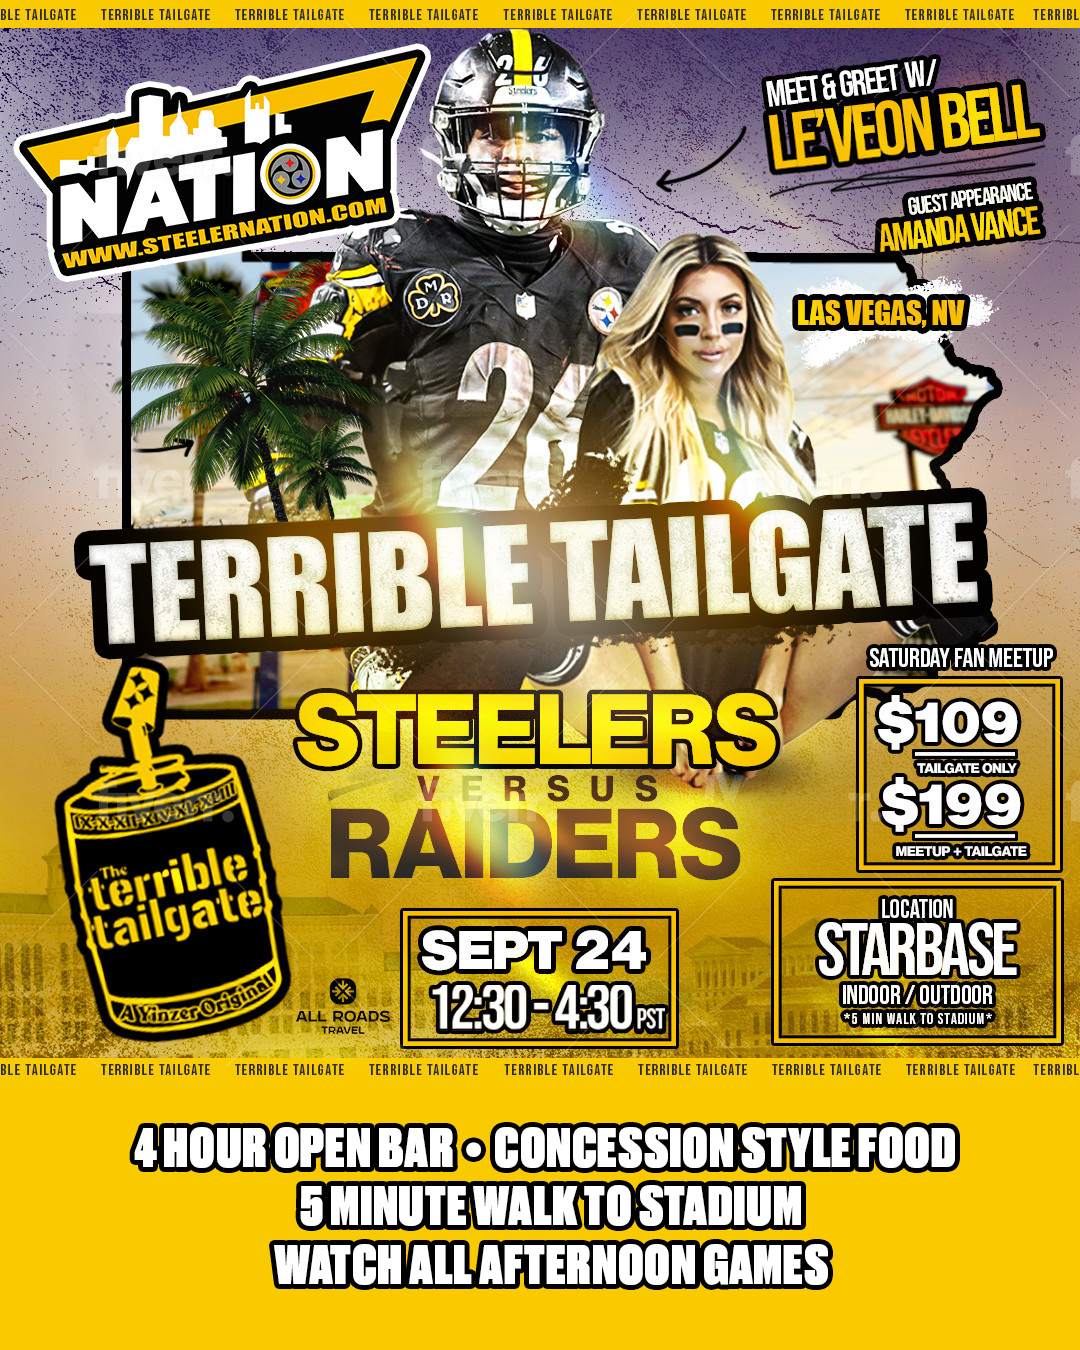 Official Terrible Tailgate 9/19 vs Raiders